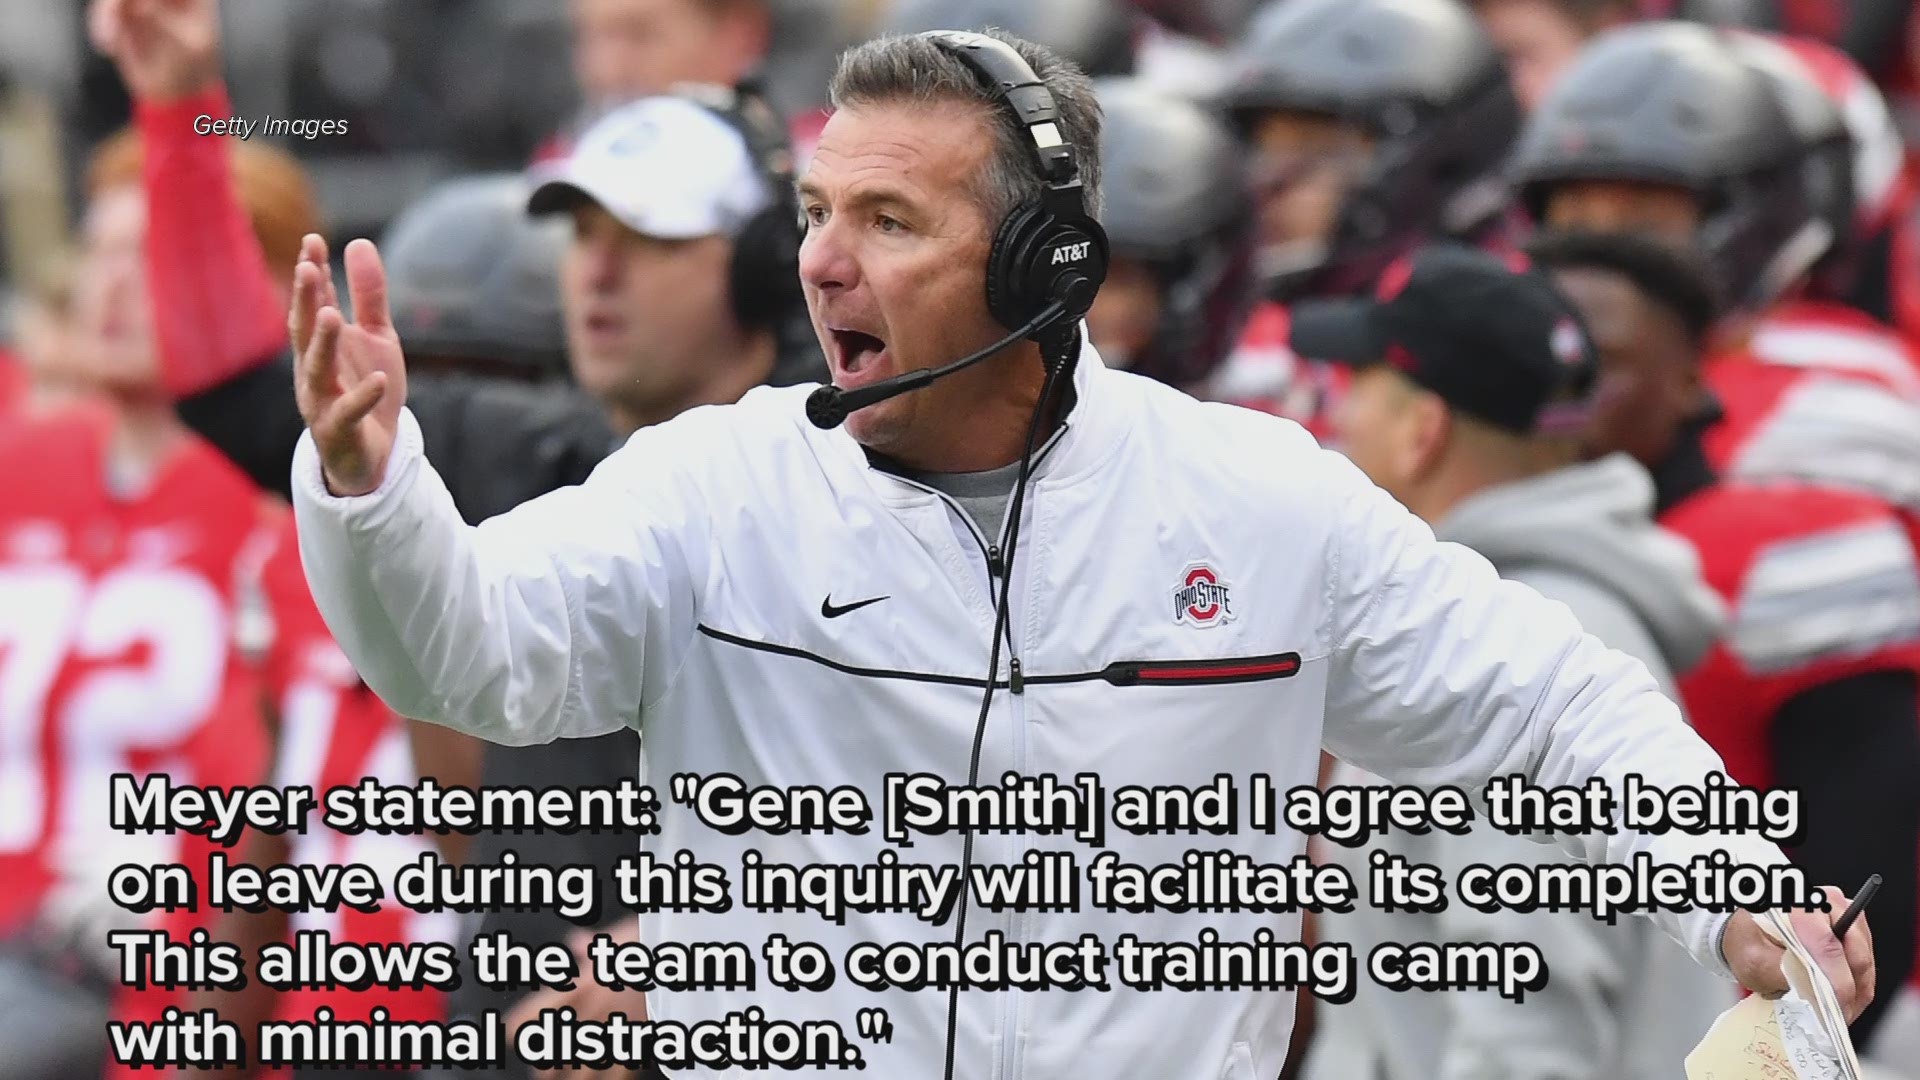 Ohio State places head coach Urban Meyer on administrative leave, opens investigation